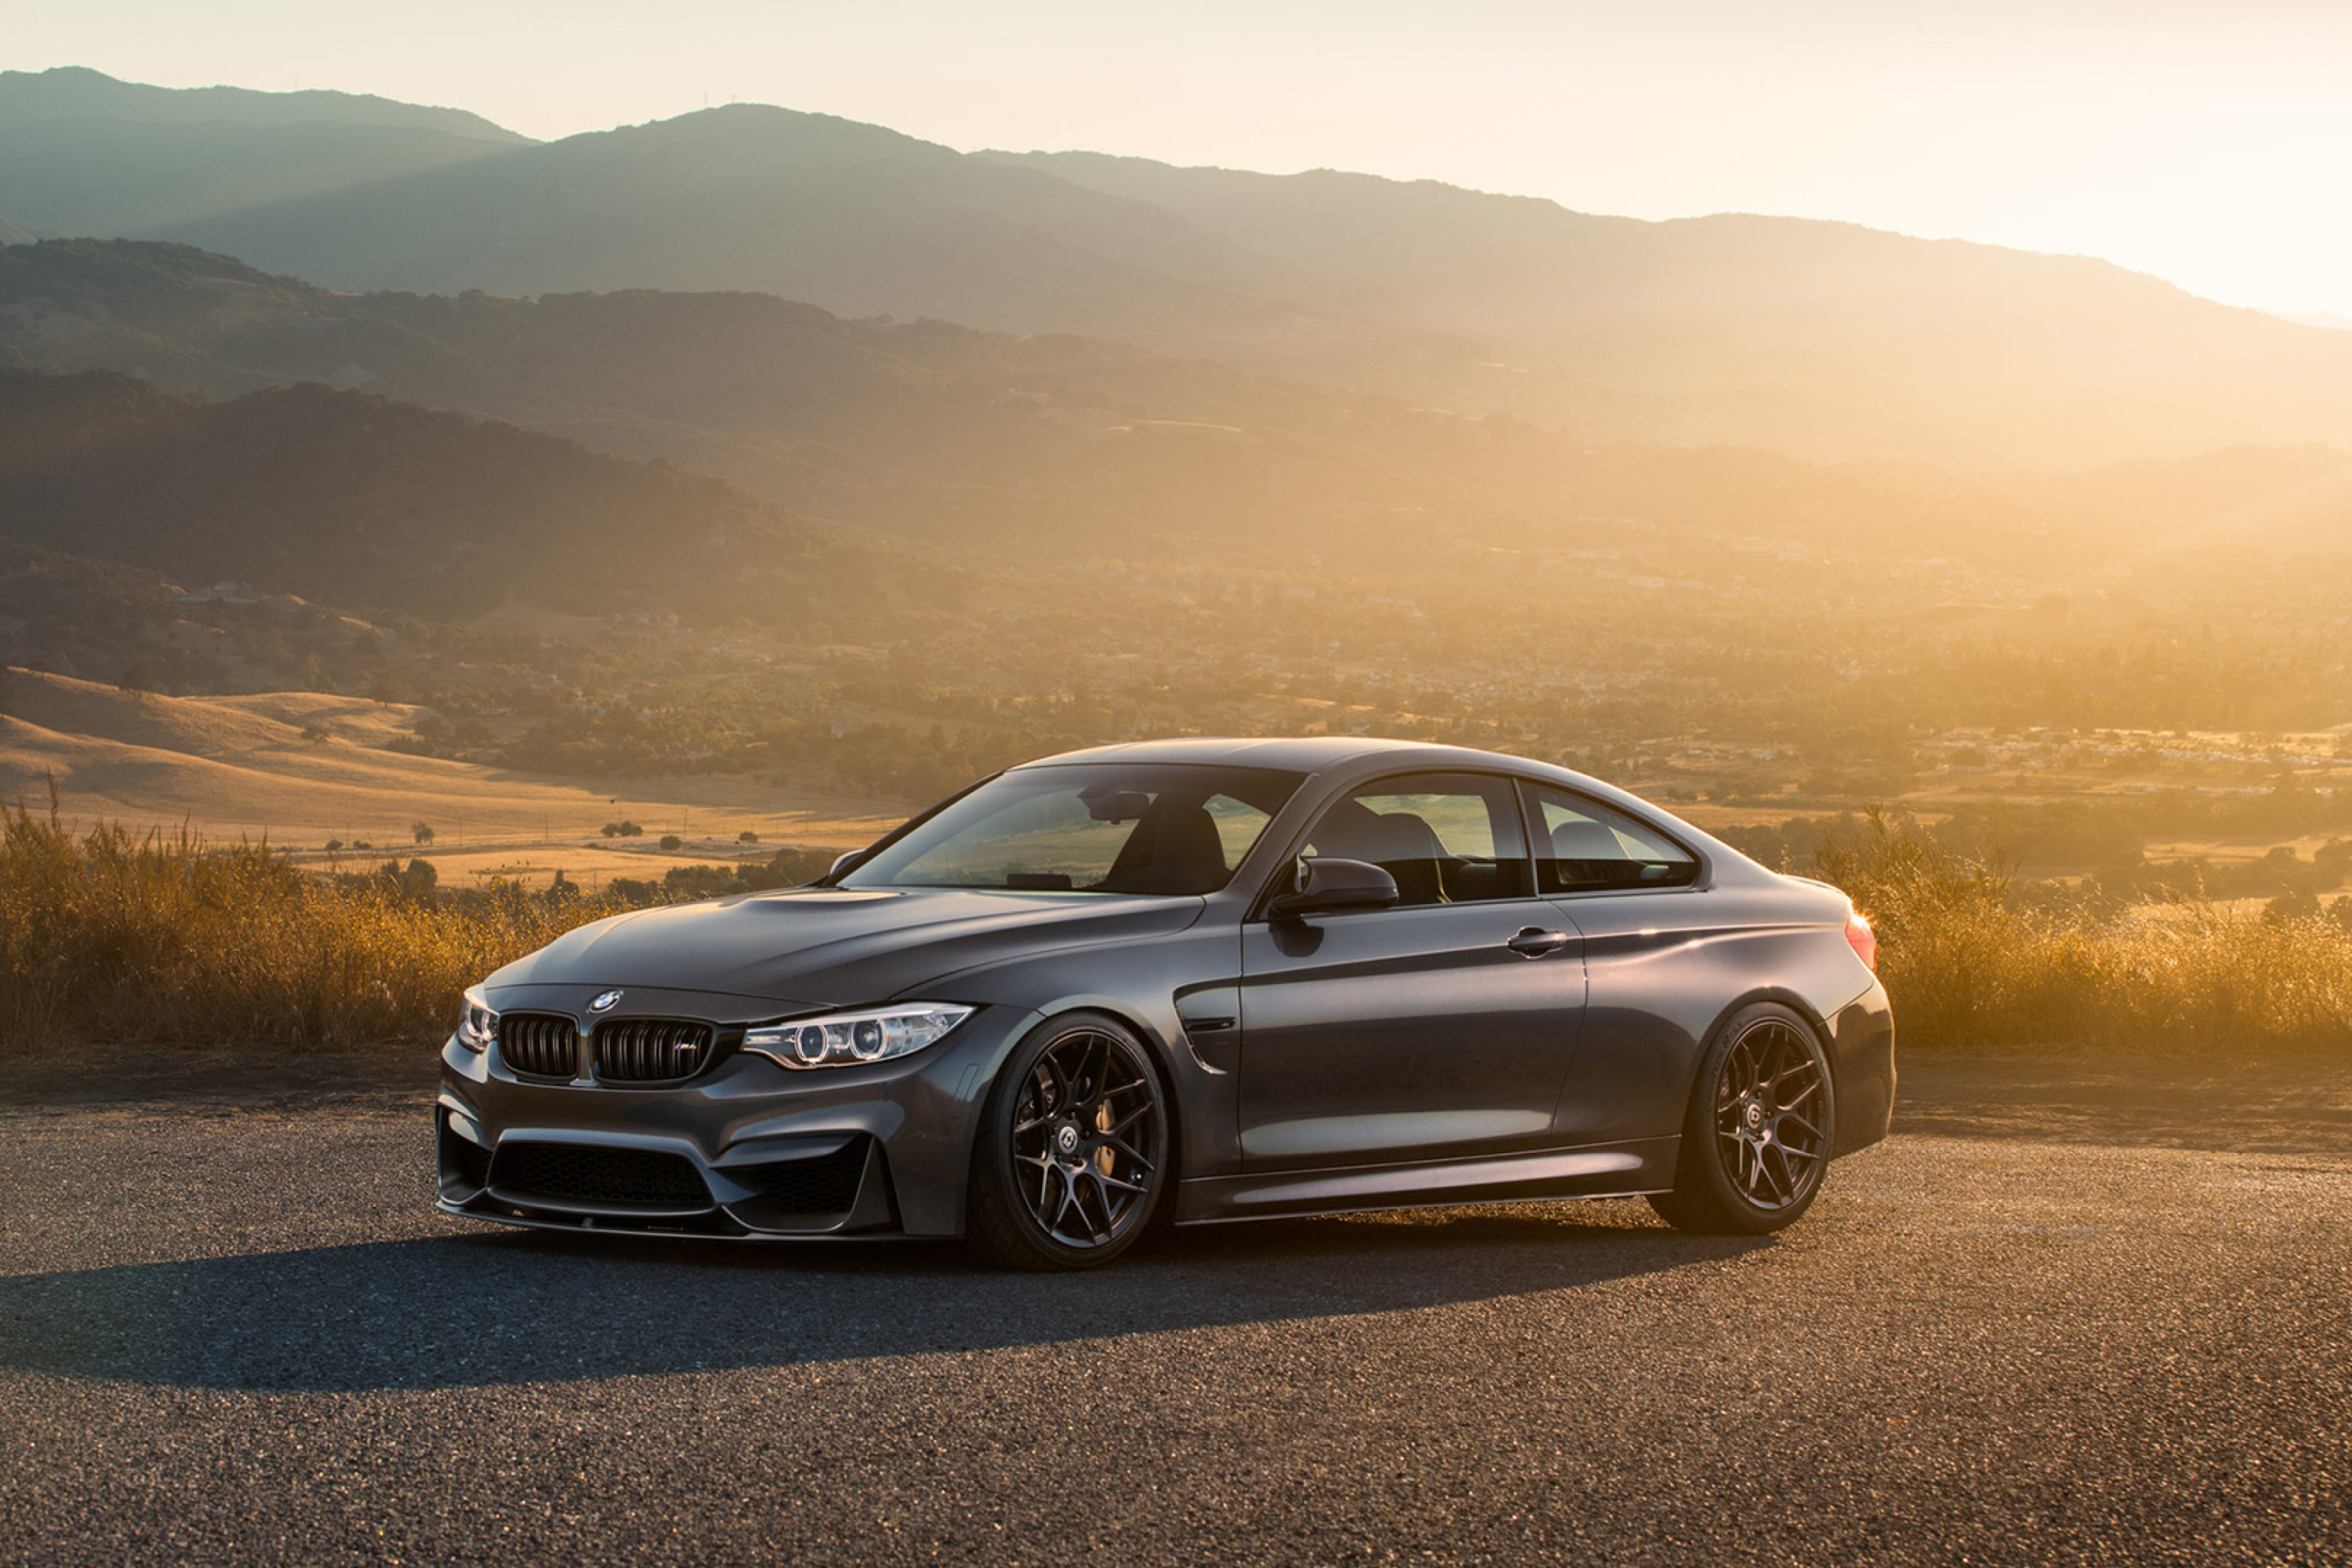 BMW 430i Coupe wallpaper 2880x1920